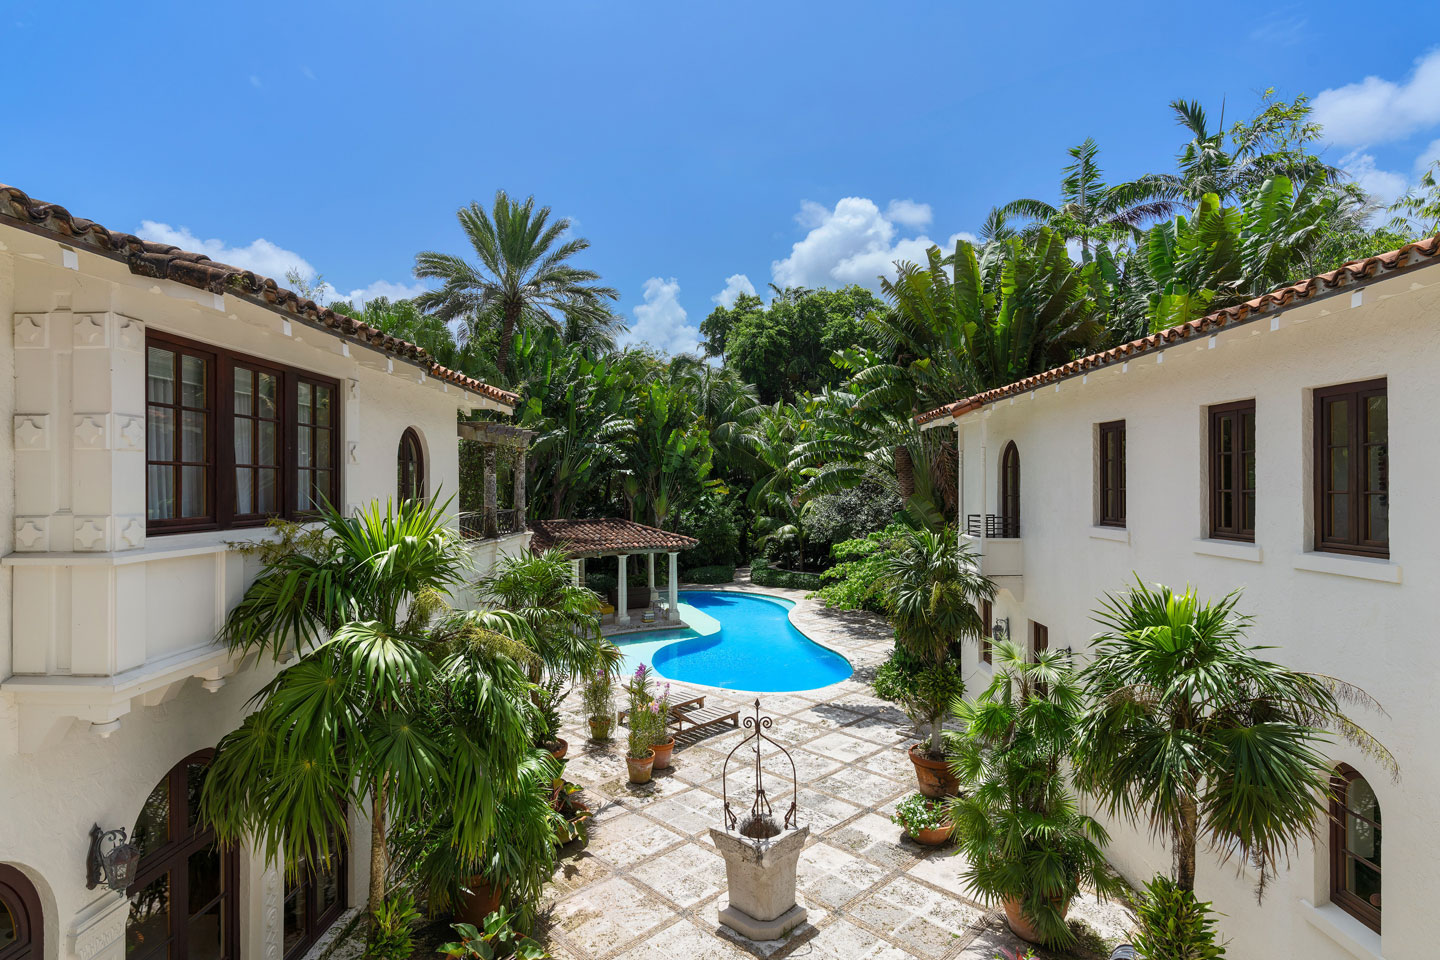 3725 Leafy Way, Coconut Grove, Miami, Florida, USA | A Pool View | Listed by Dennis Carvajal, Real Estate Agent, ONE Sotheby's International Realty | Finest Residences